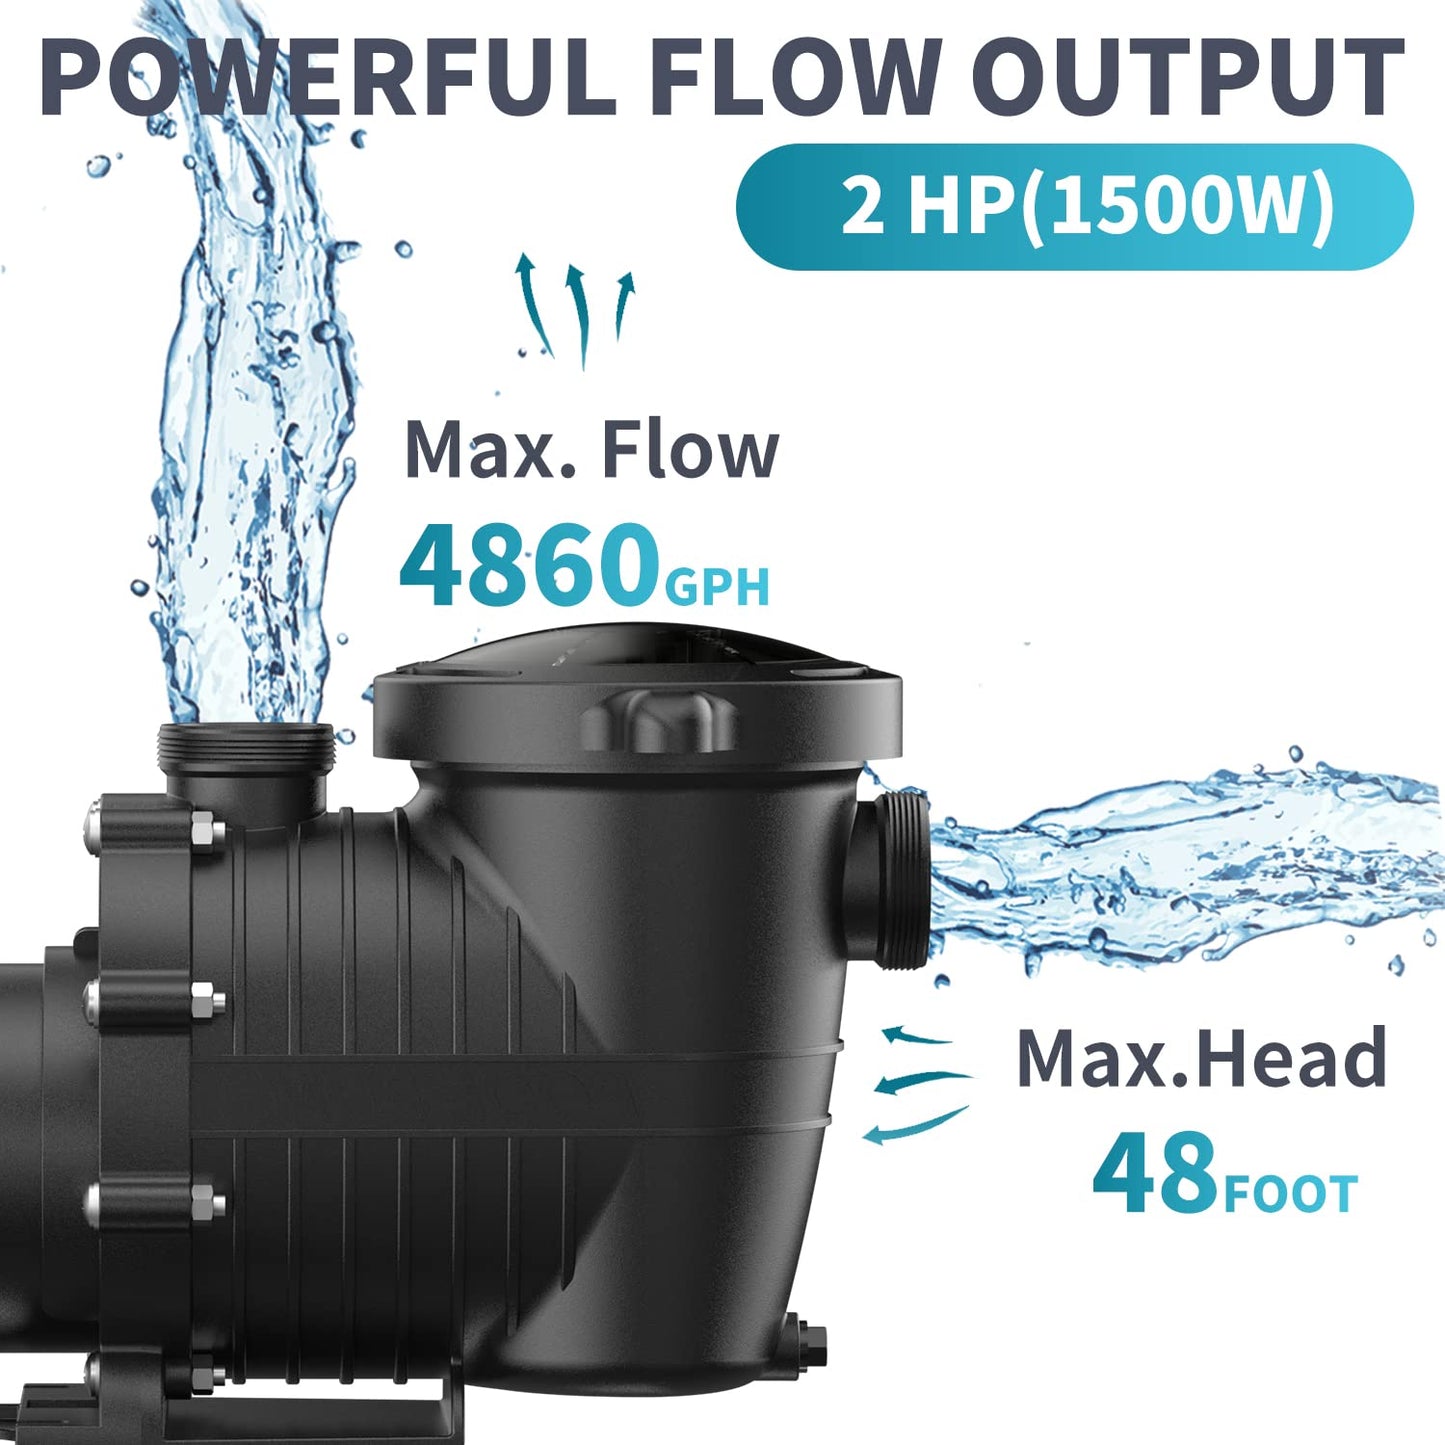 Pool Pump In/Above Ground, 2.0HP 115V/230V Dual Voltage Swimming Pool Pump with Filter Basket, 4860GPH Max Flow Circulating Pump for Saltwater and Fresh Water Pools, IP44 Waterproof, Energy Efficient 2HP 115v/230v(single Speed)